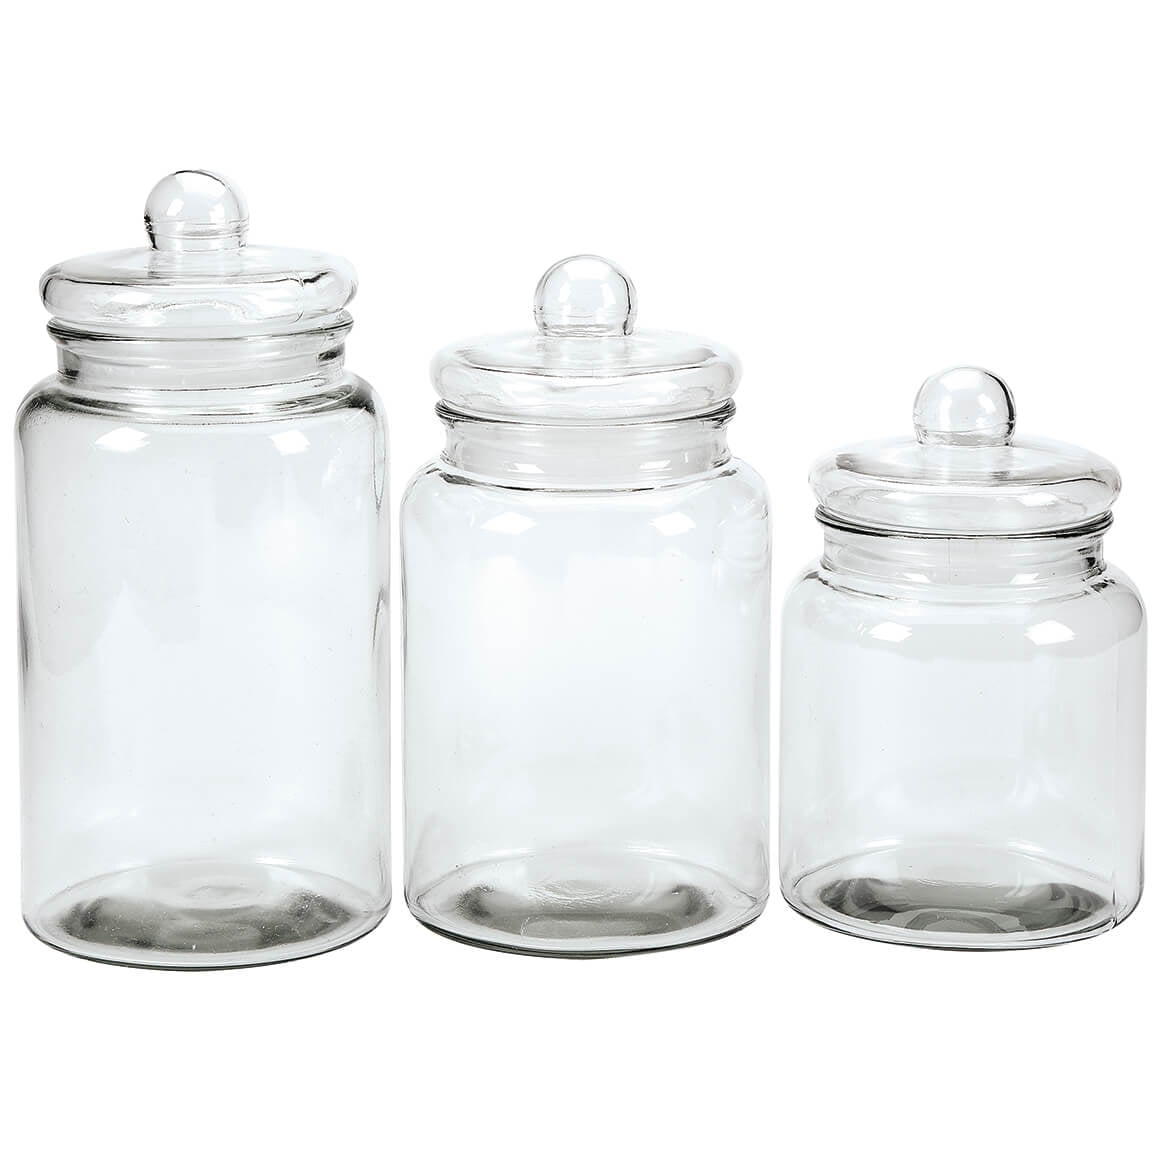 Set of 3 Clear Glass Cylinder Decorative Storage Apothecary Jars with Lids 